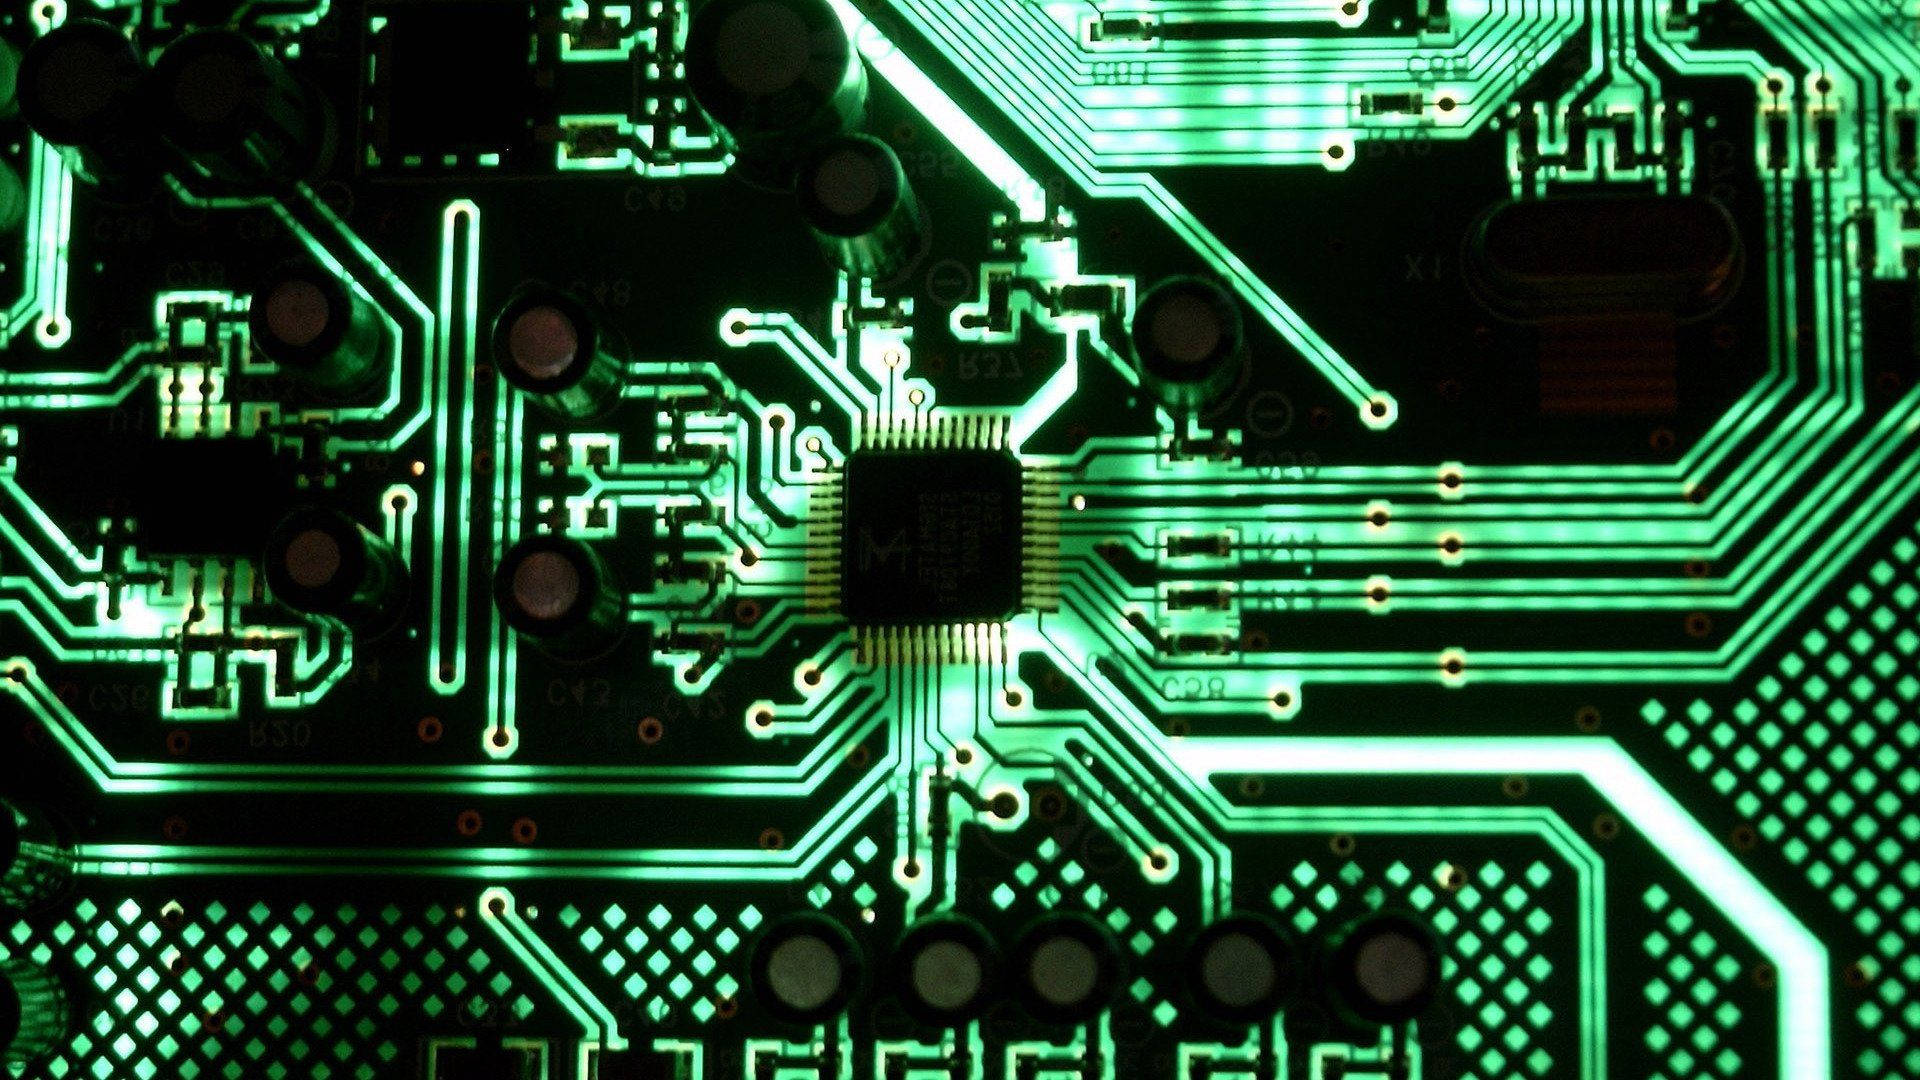 Centered Microchip, Circuit Board Background